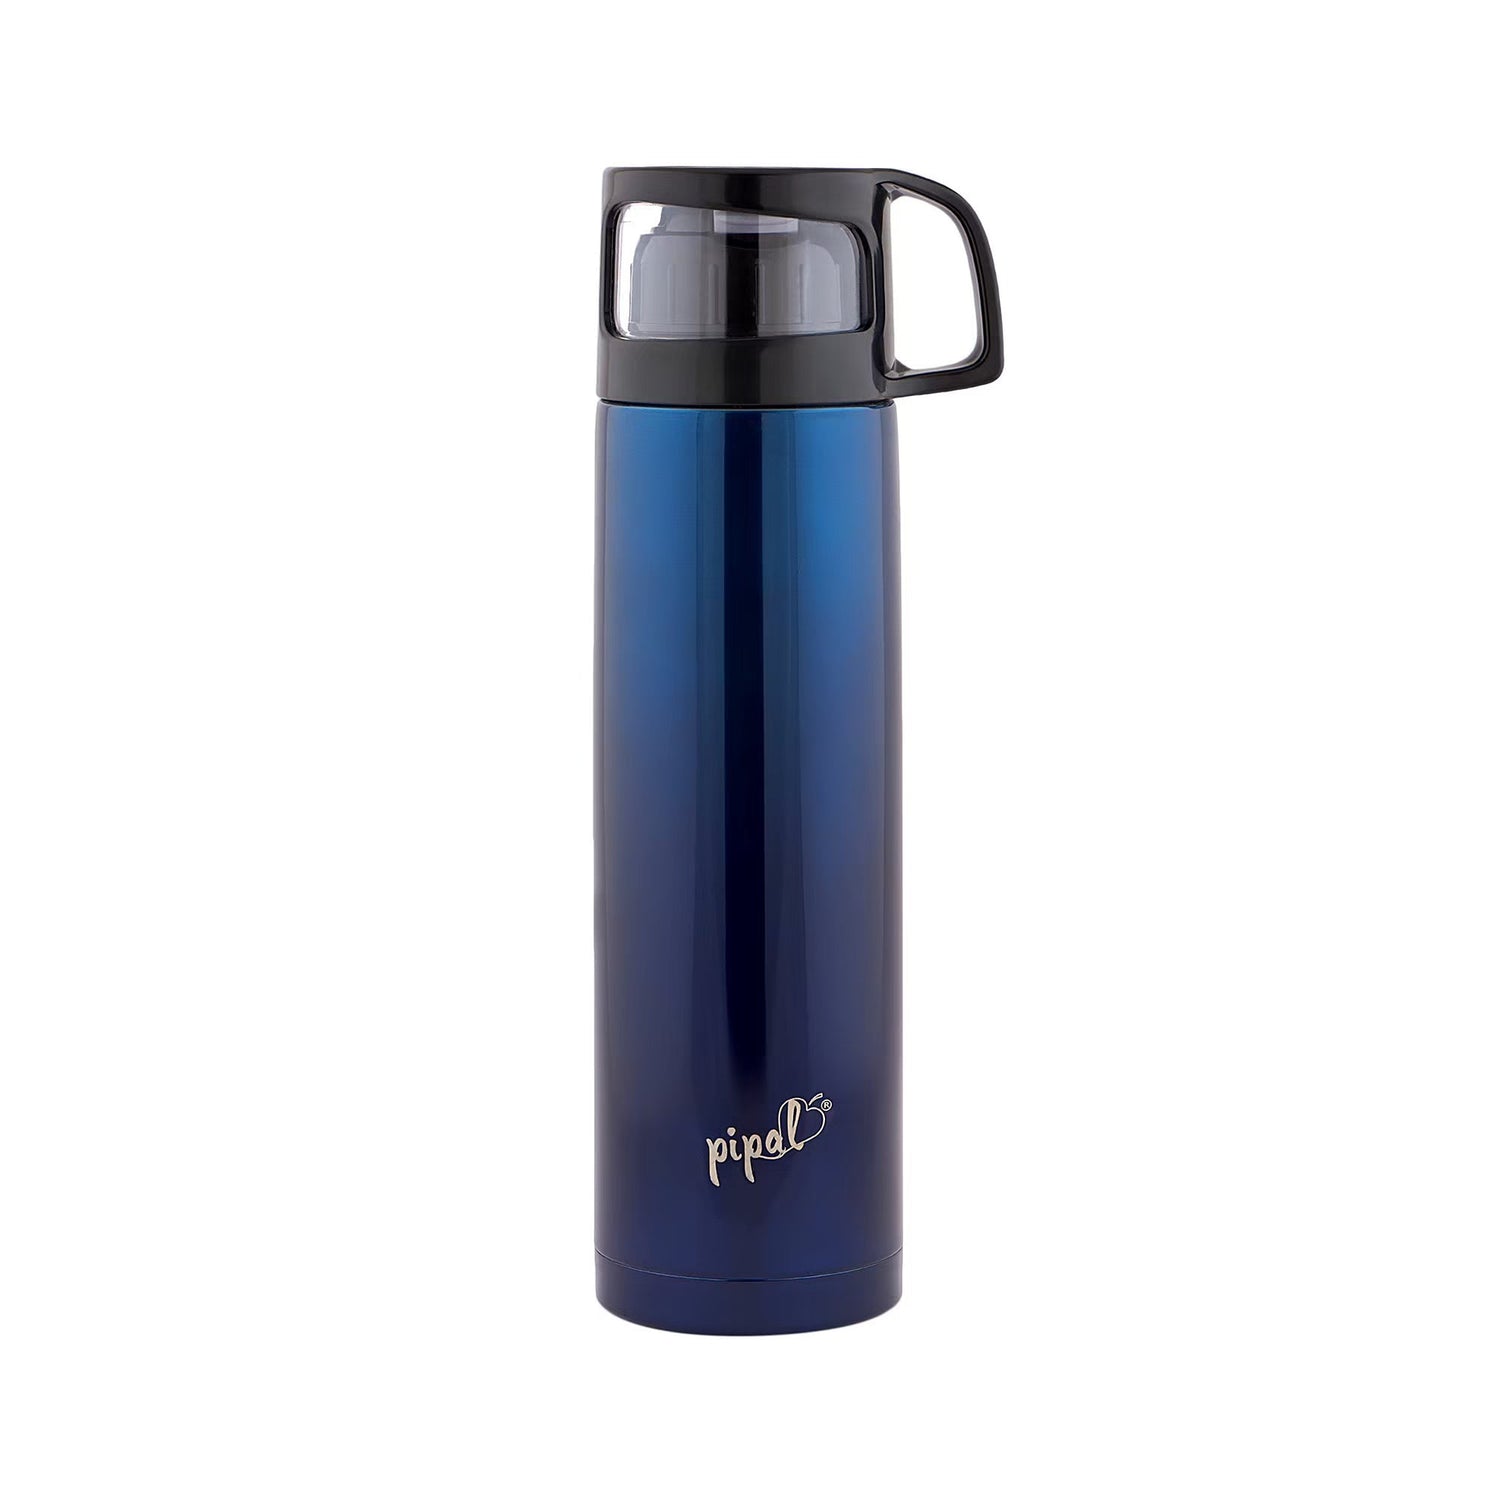 Pipal Emerald Insulated Flask